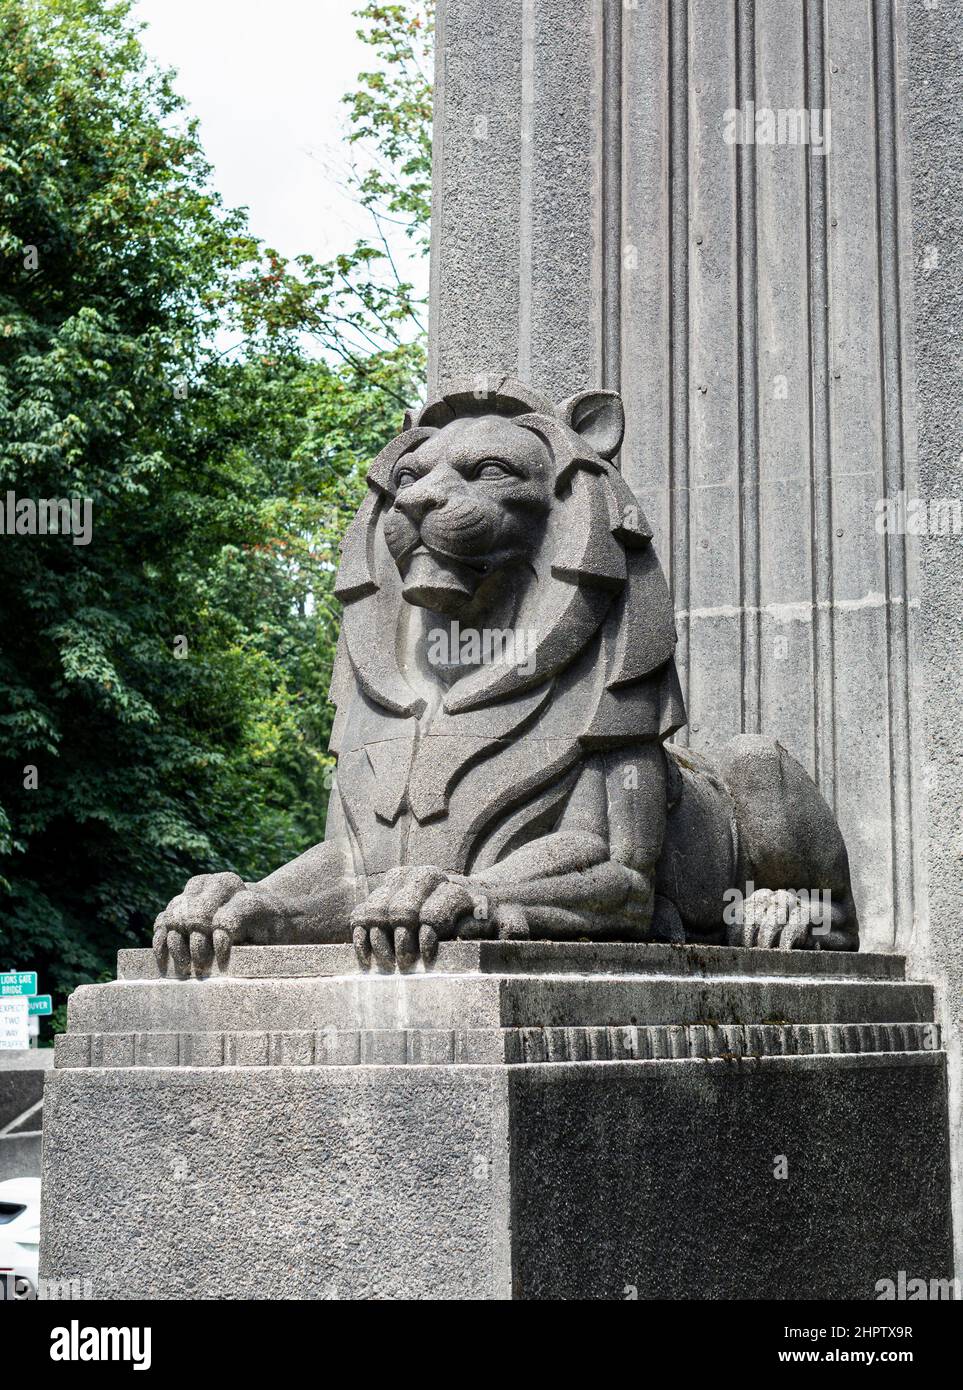 The Lion of the Liion's Gate Bridge: A large sculpture of a lion graces each entrance tower of Vancouver's Lion's Gate Bridge.  This one is on the Stanley Park side. Stock Photo